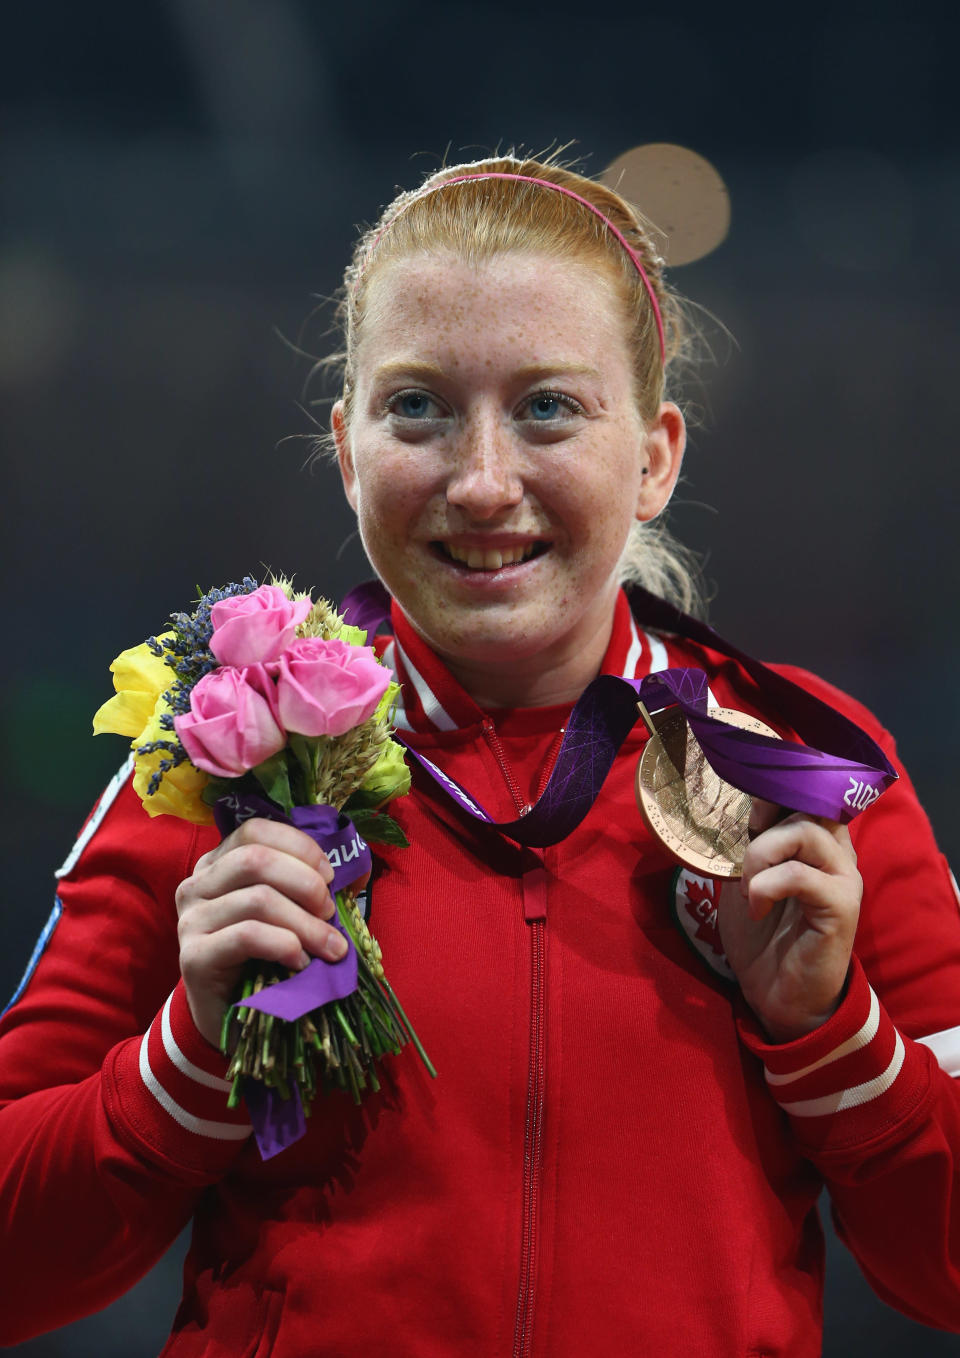 LONDON, ENGLAND - AUGUST 31: Bronze medalist Virginia Mclachlan of Canada poses on the podium during the medal ceremony in the Women's 200m - T35 Final on day 2 of the London 2012 Paralympic Games at Olympic Stadium on August 31, 2012 in London, England. (Photo by Michael Steele/Getty Images)